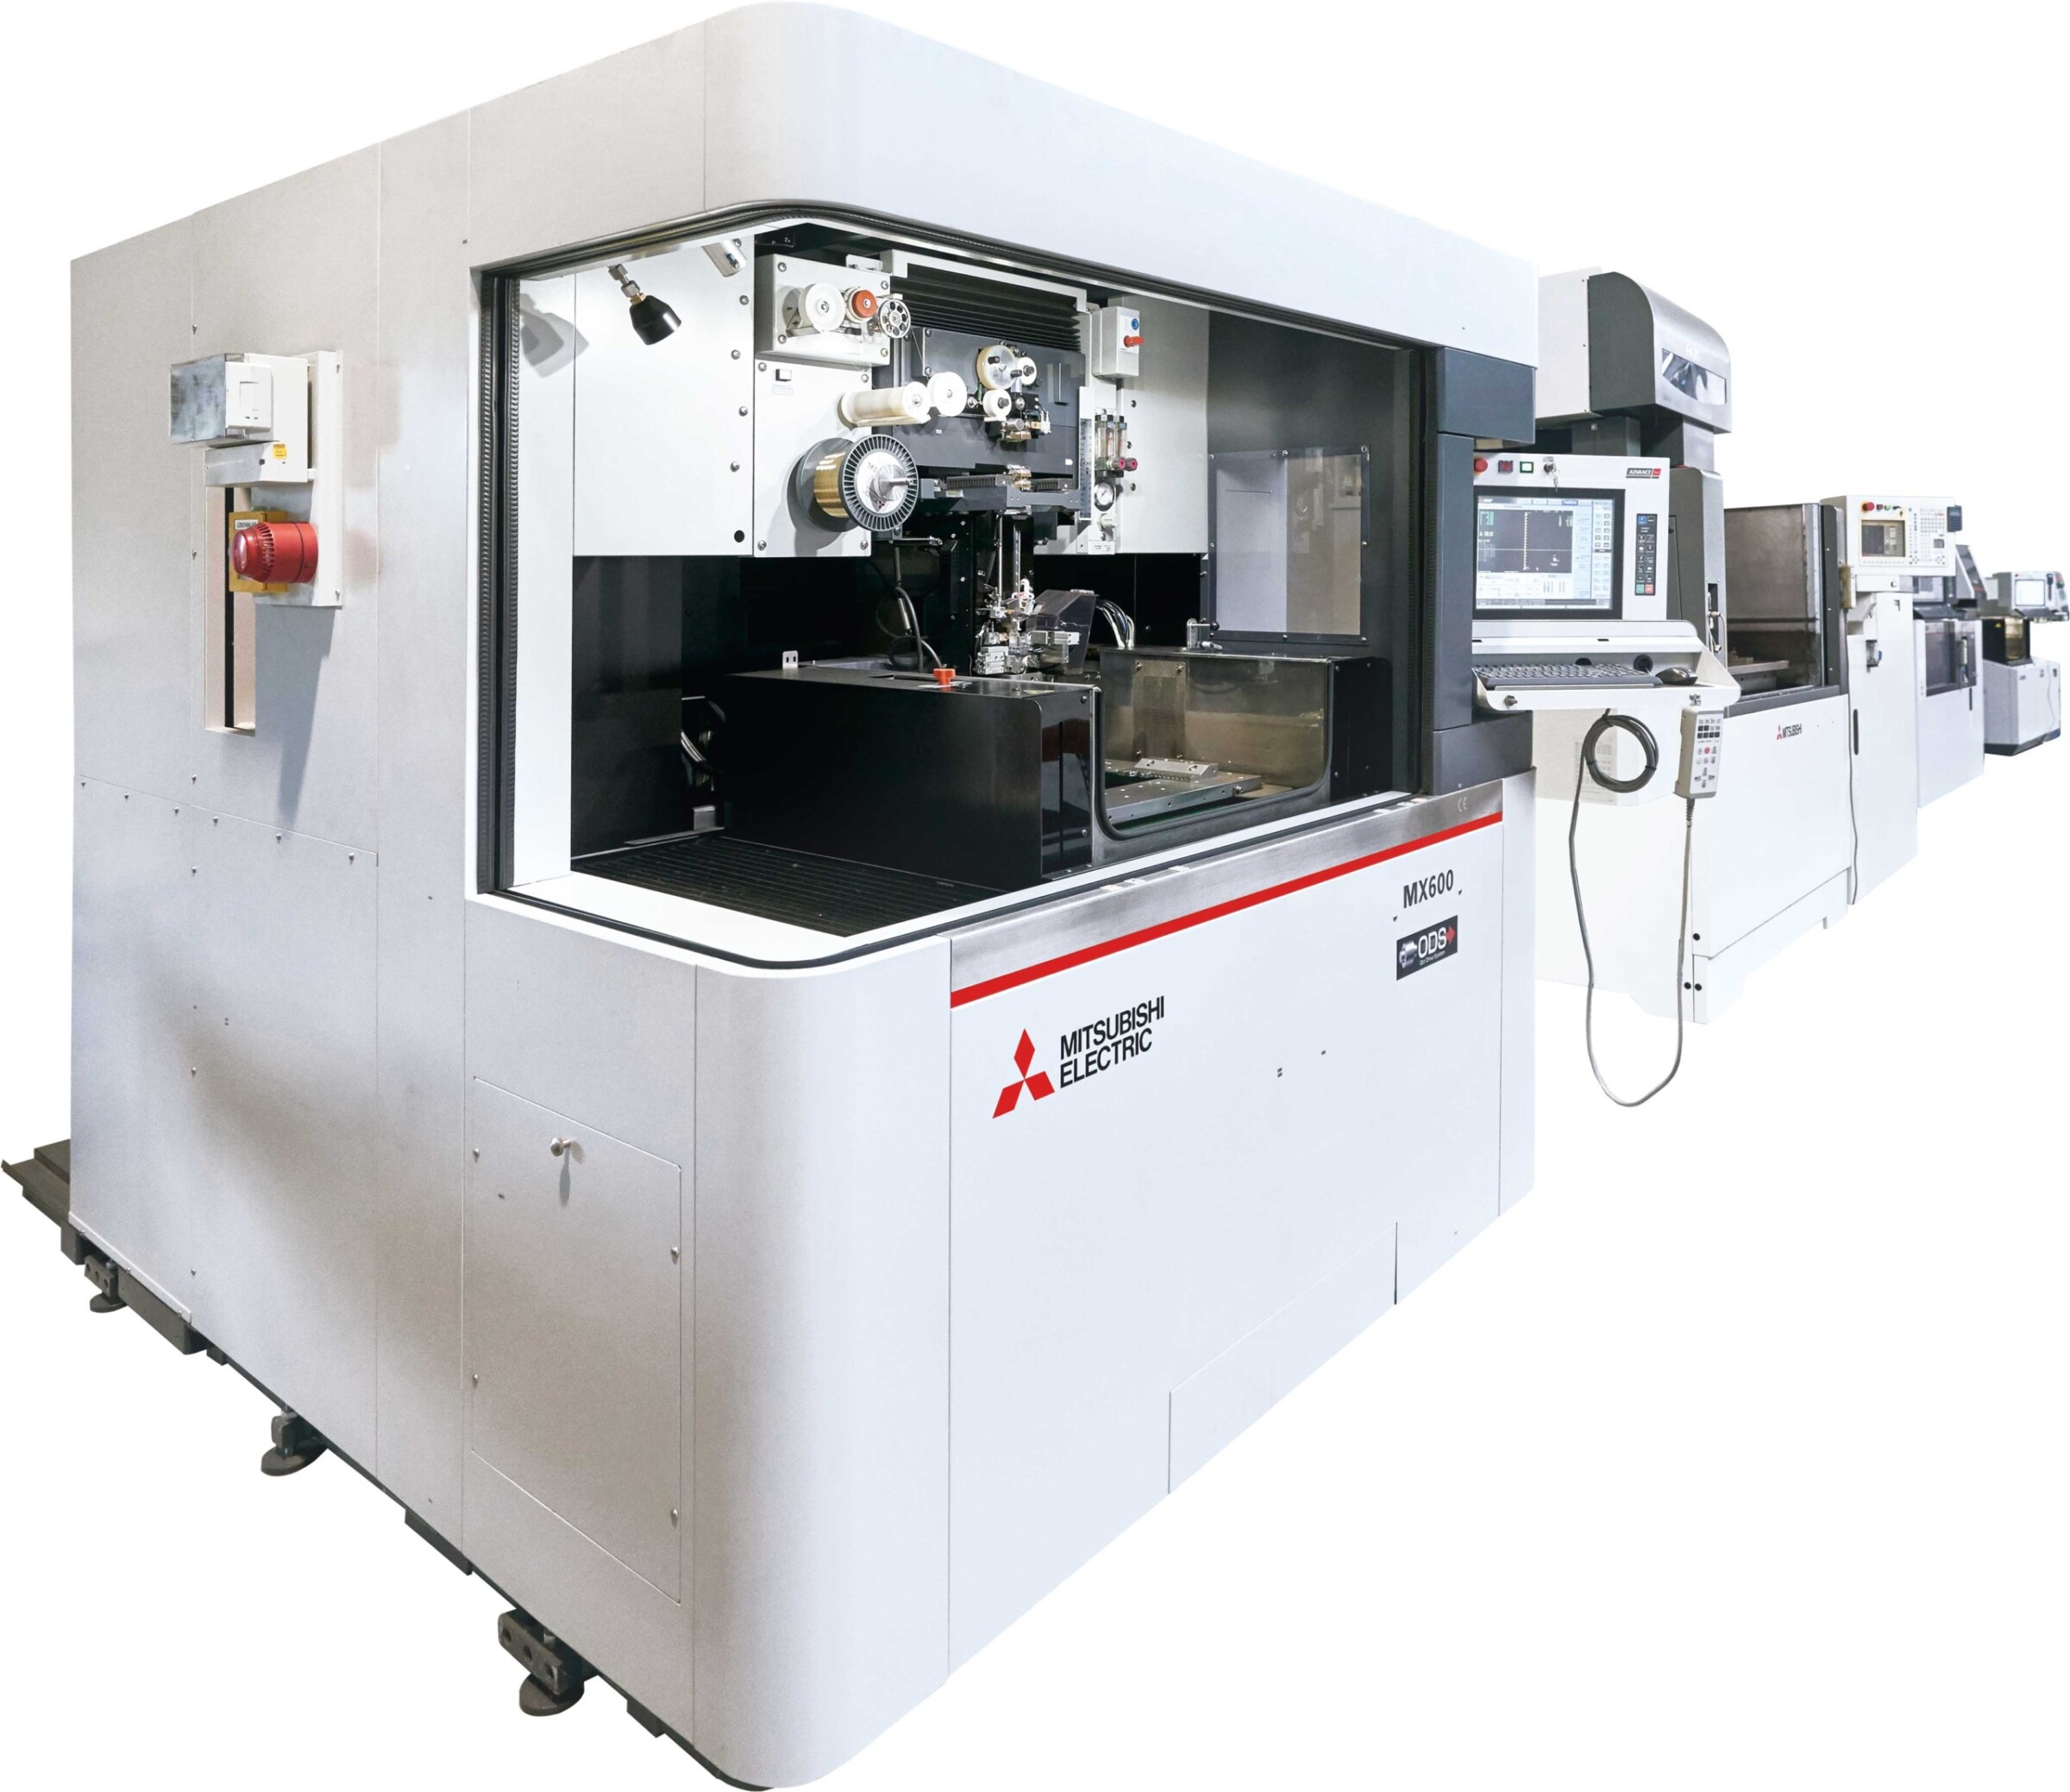 K-L Präzision has a total of twelve Mitsubishi Electric machines, including two oil-bath MX600 machines.